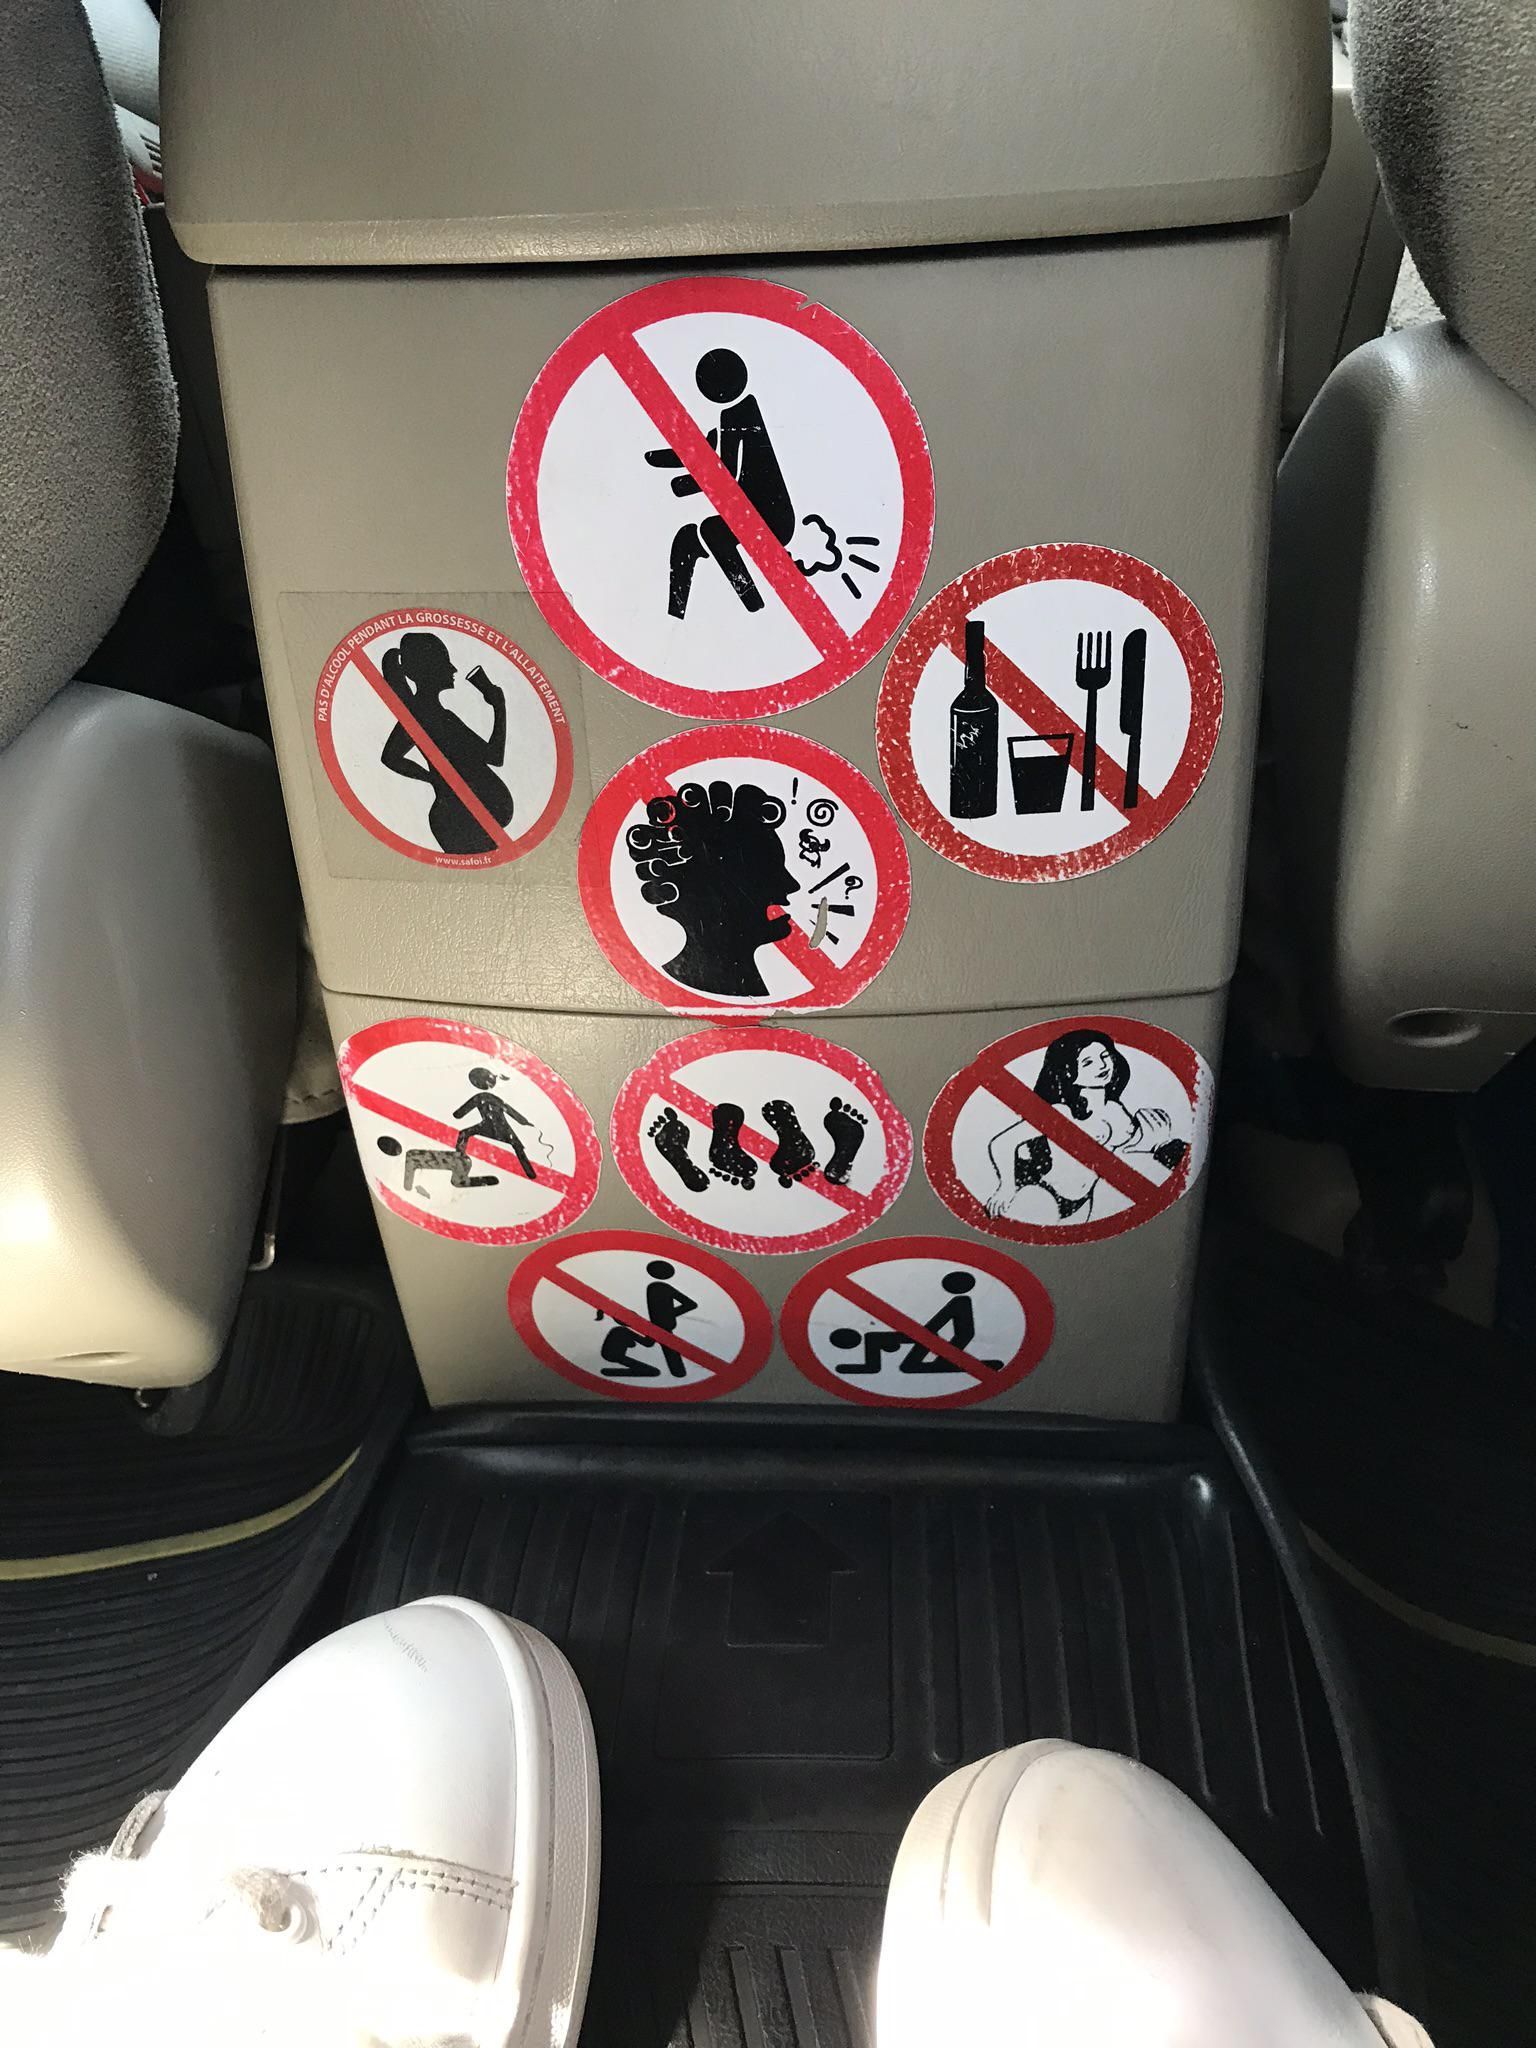 Stickers in the back of a taxi I took on my vacation in Thailand